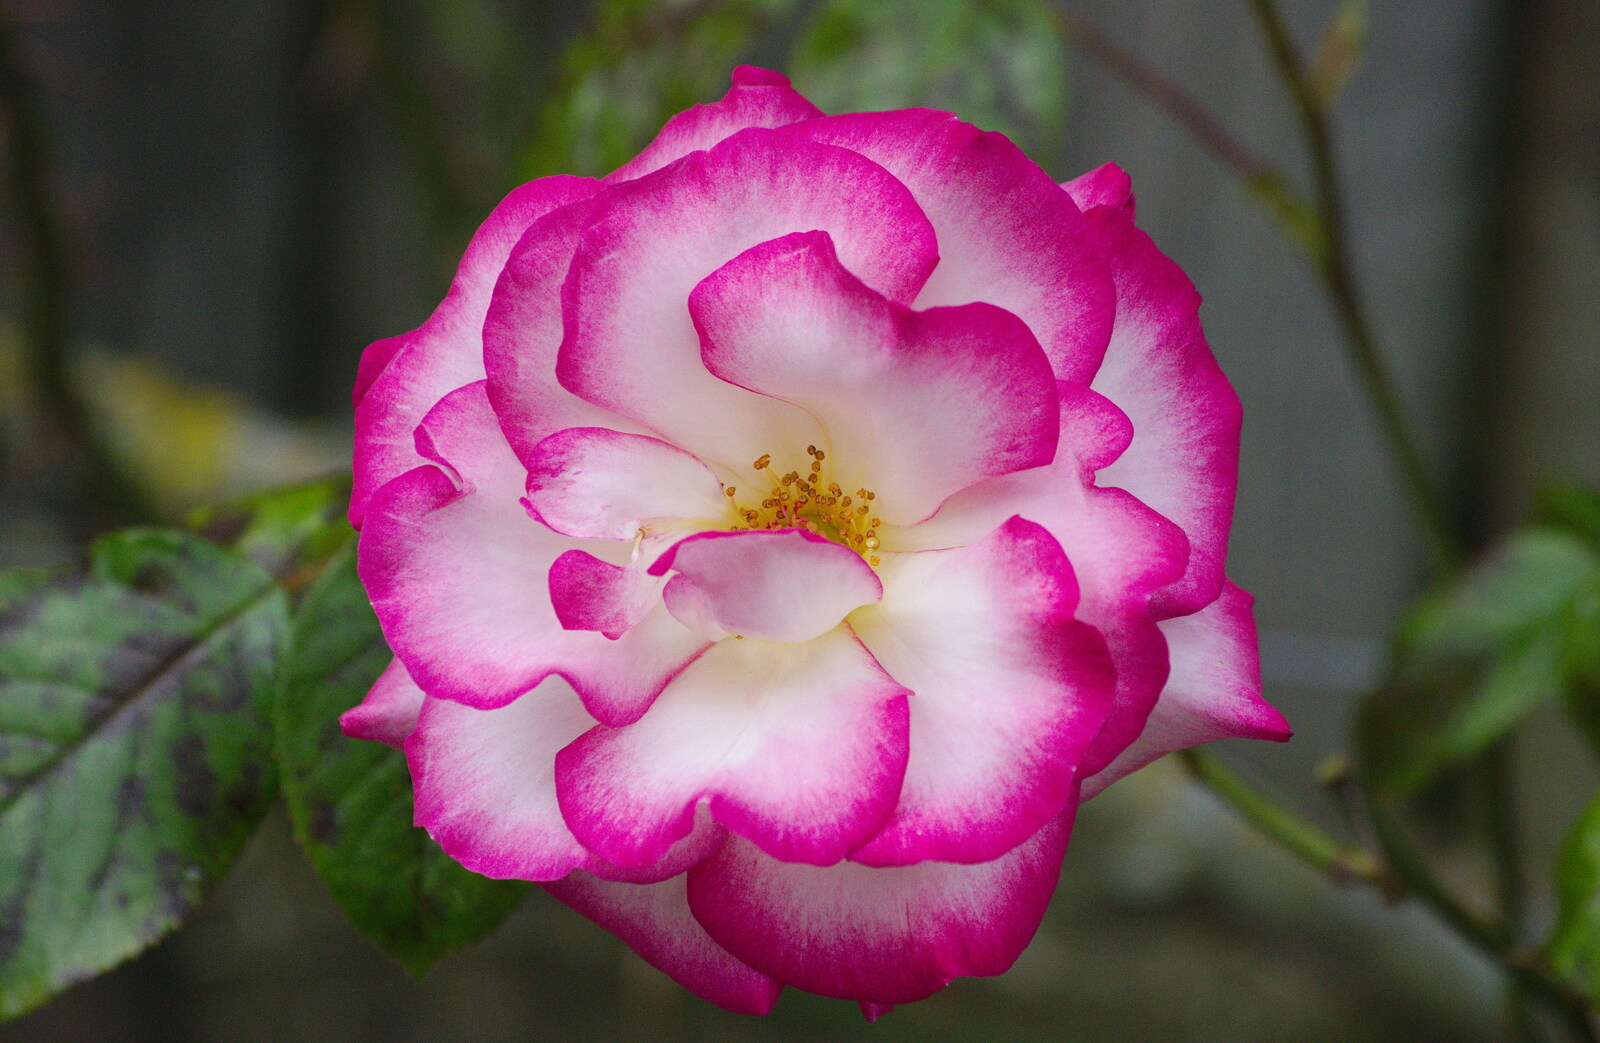 A Birthday Trip to the Zoo, Banham, Norfolk - 26th May 2014: Bright pink-edged rose